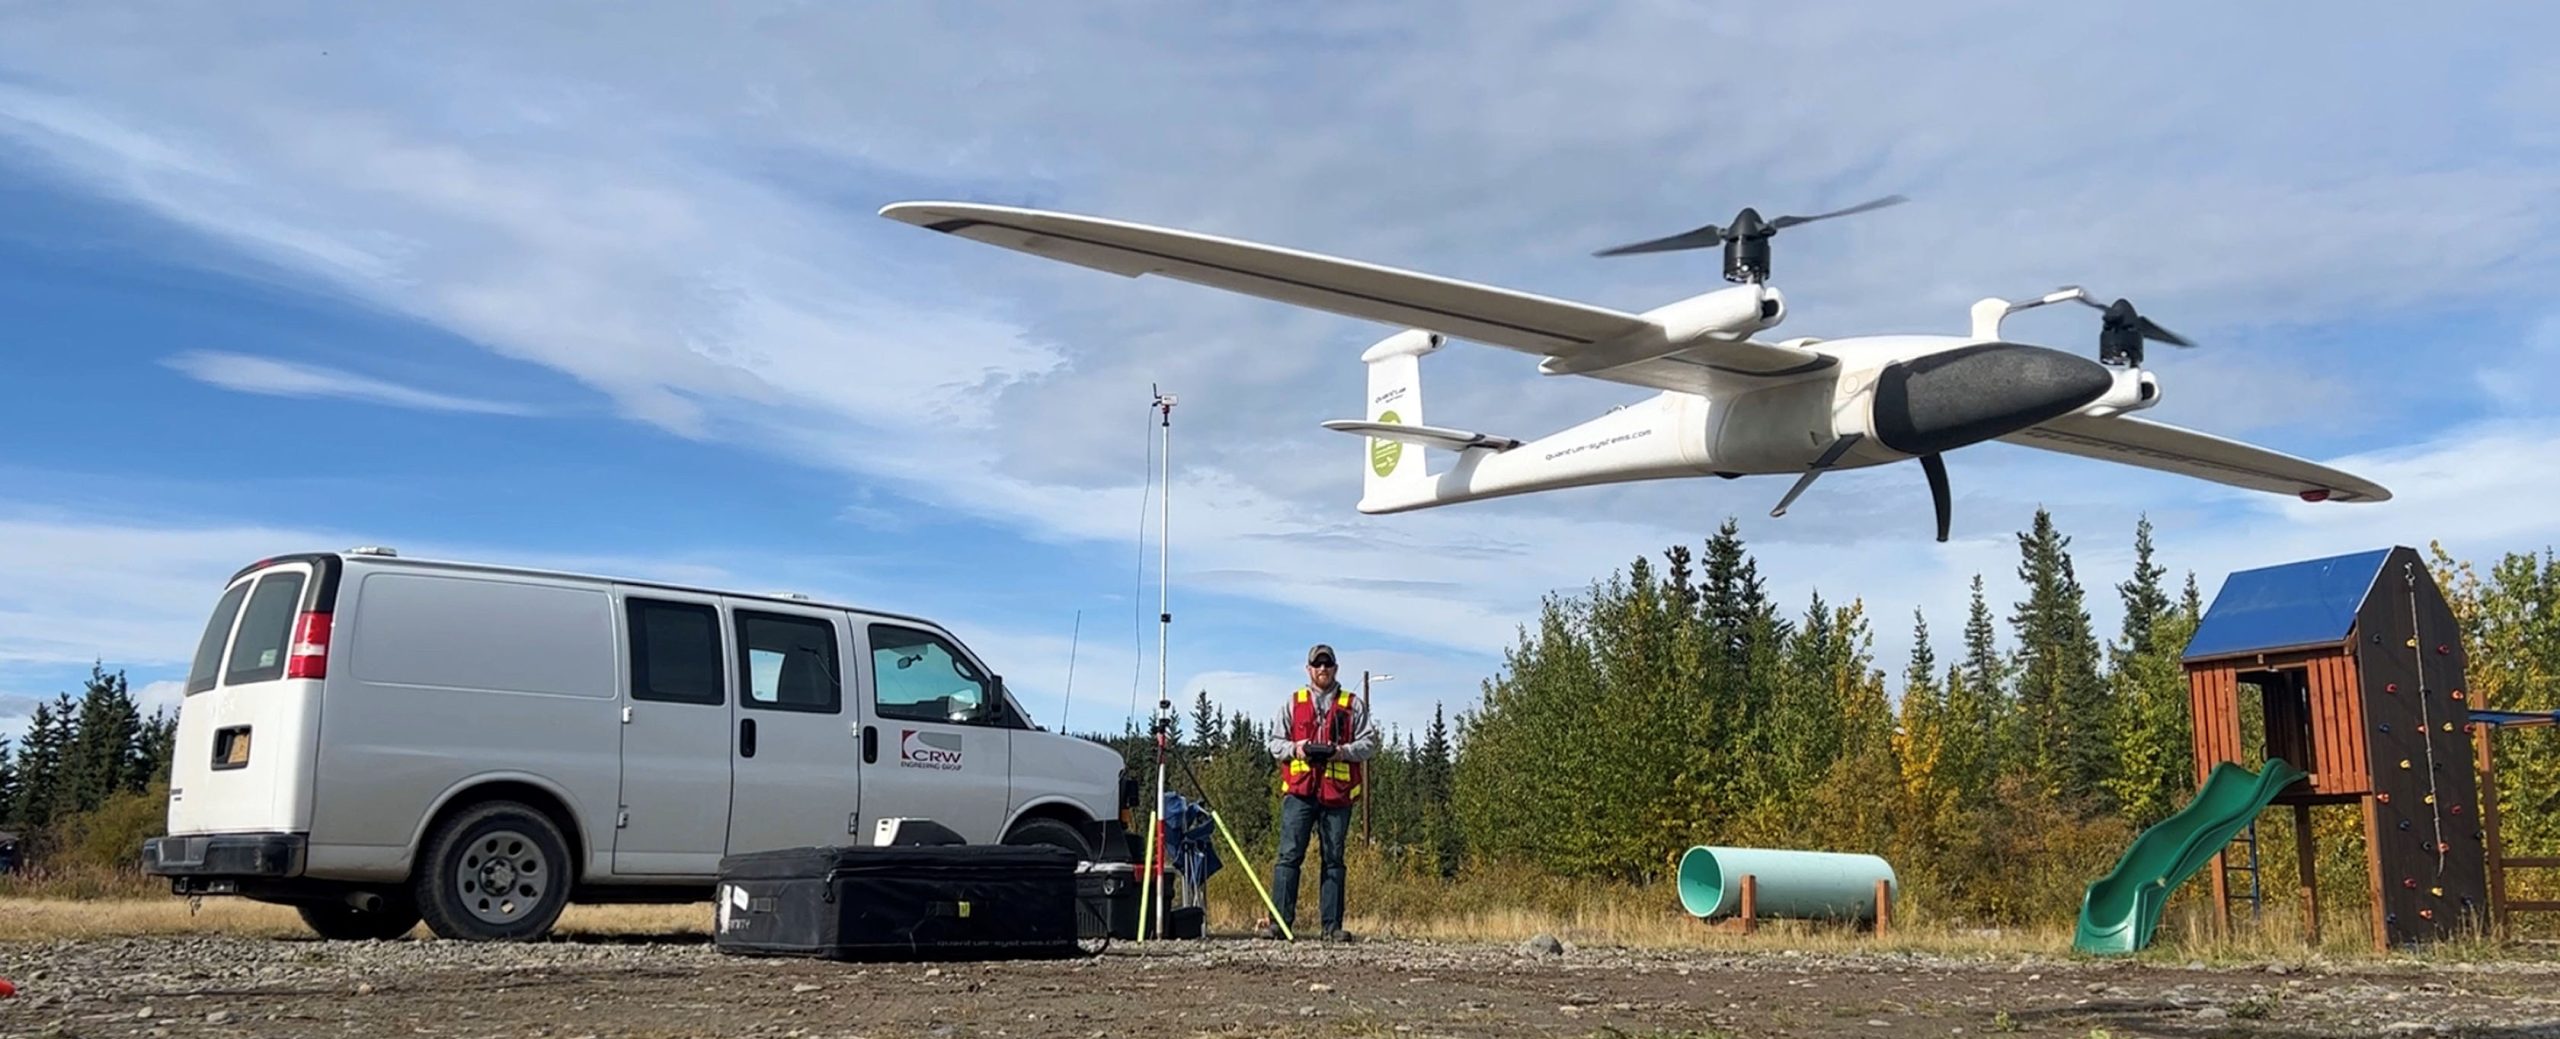 CRW Engineering Group, in Anchorage Alaska, provides land surveying services